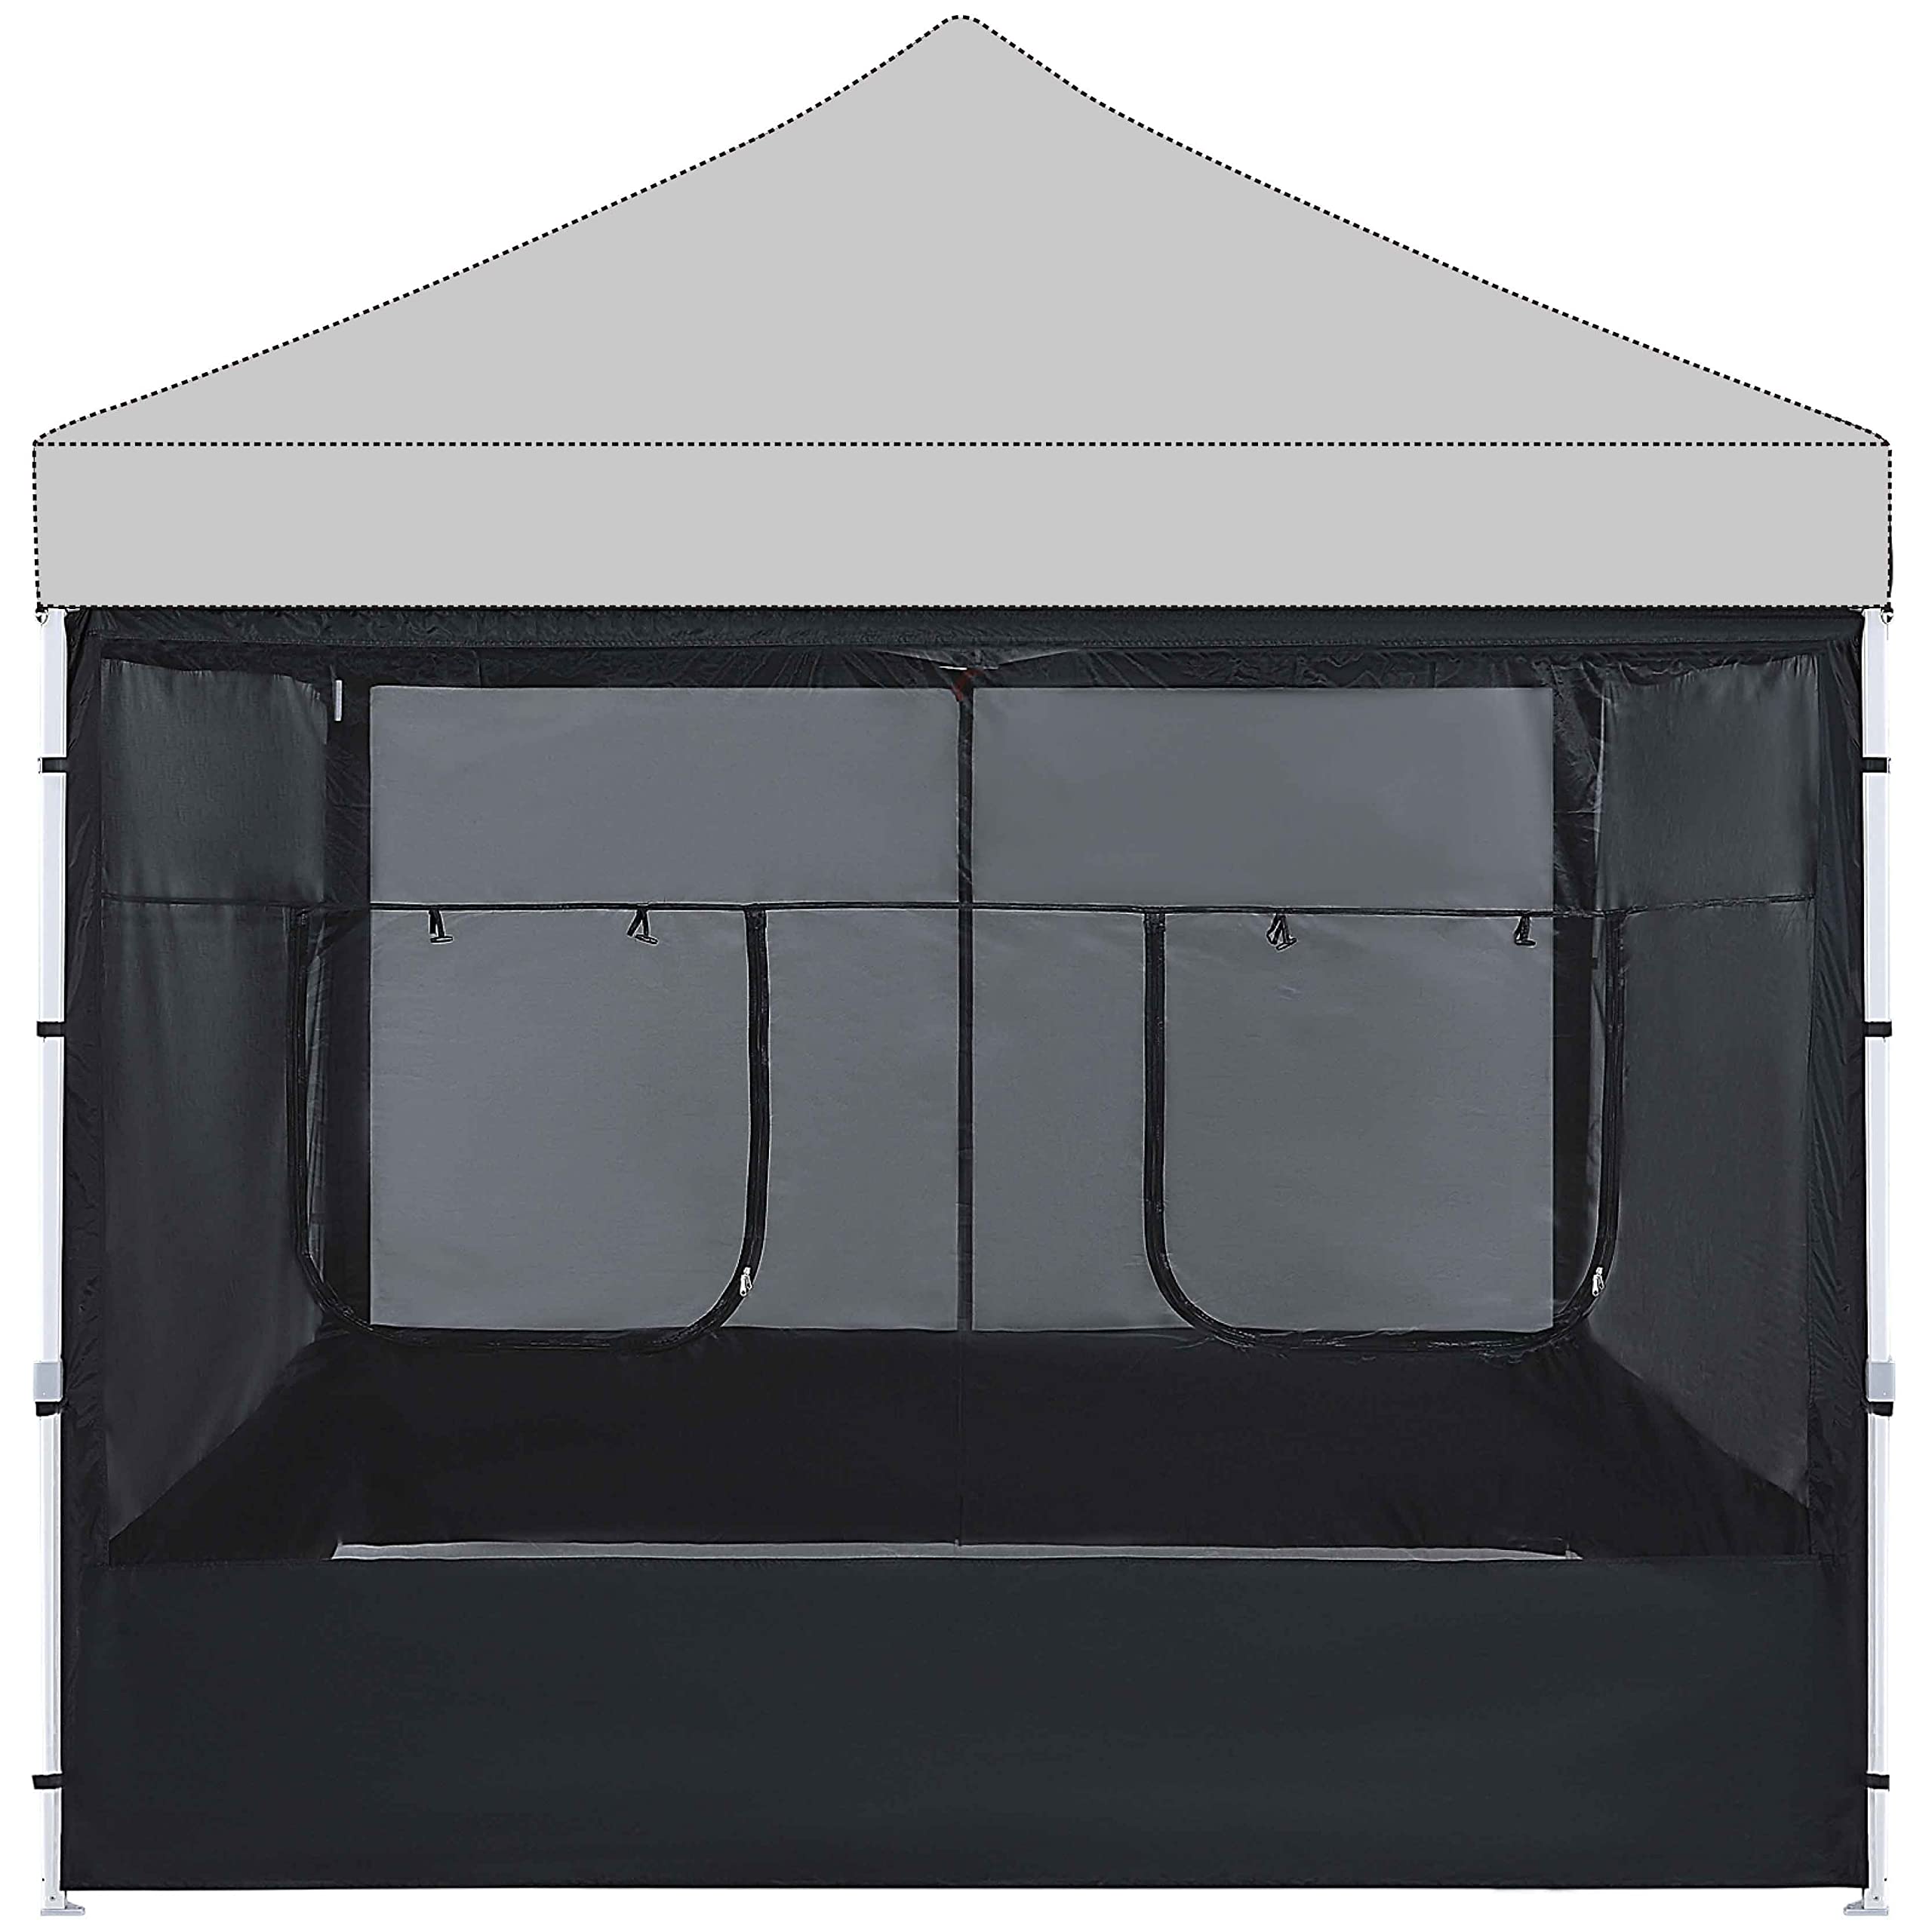 ABCCANOPY Food Booth 10' x 10' Sidewall Kit Set of 4, Includes 2 Roll-Up Serving Windows, Commercial Grade Mesh, Black